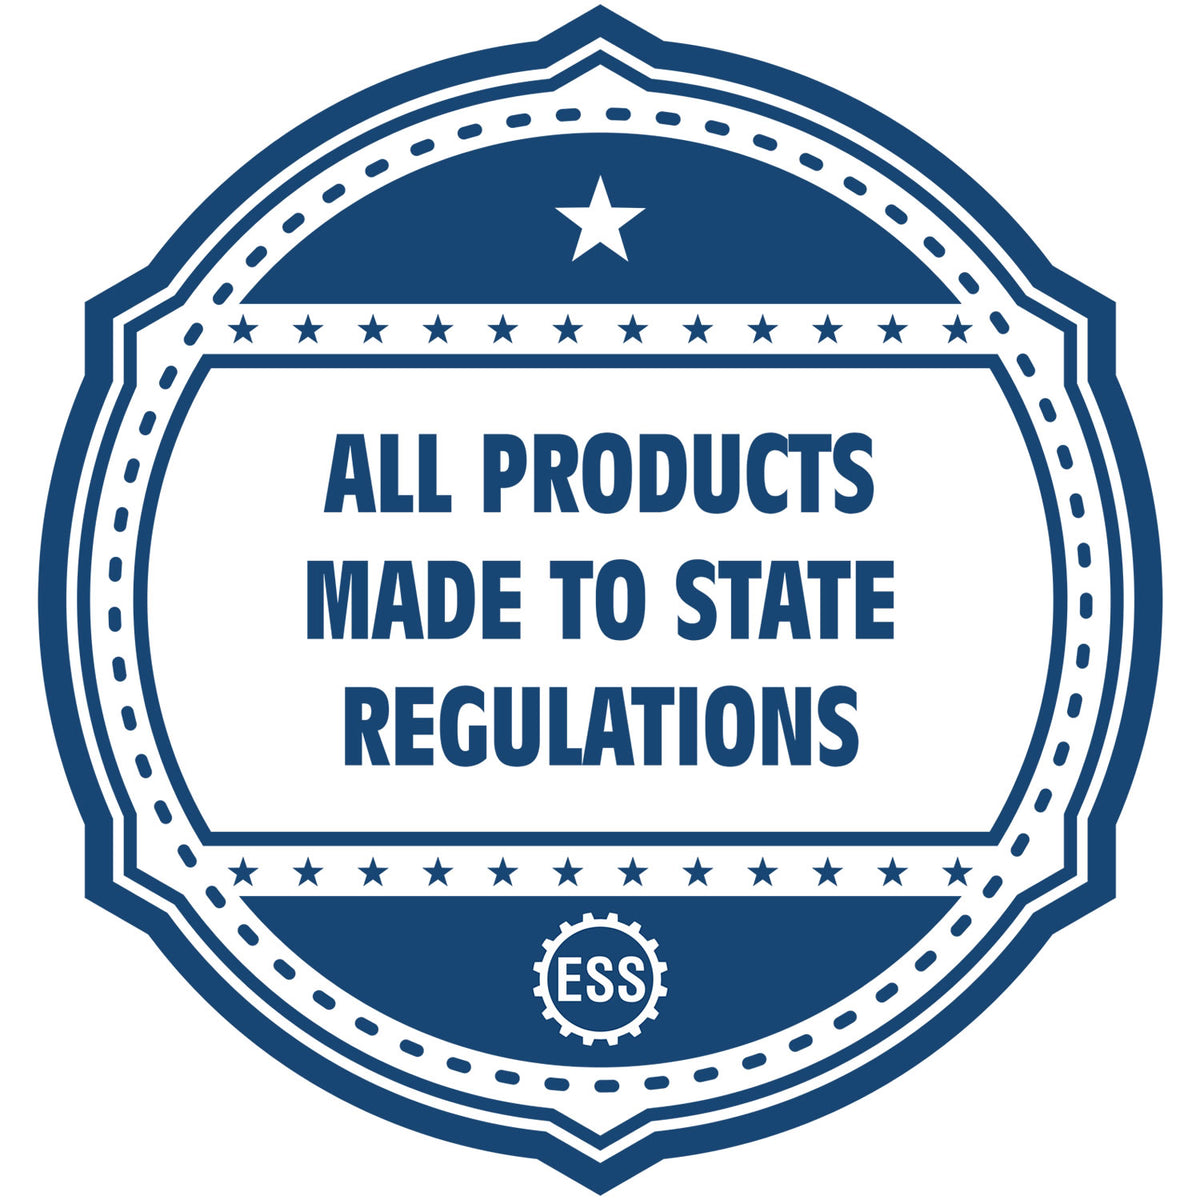 An icon or badge element for the Louisiana Engineer Desk Seal showing that this product is made in compliance with state regulations.